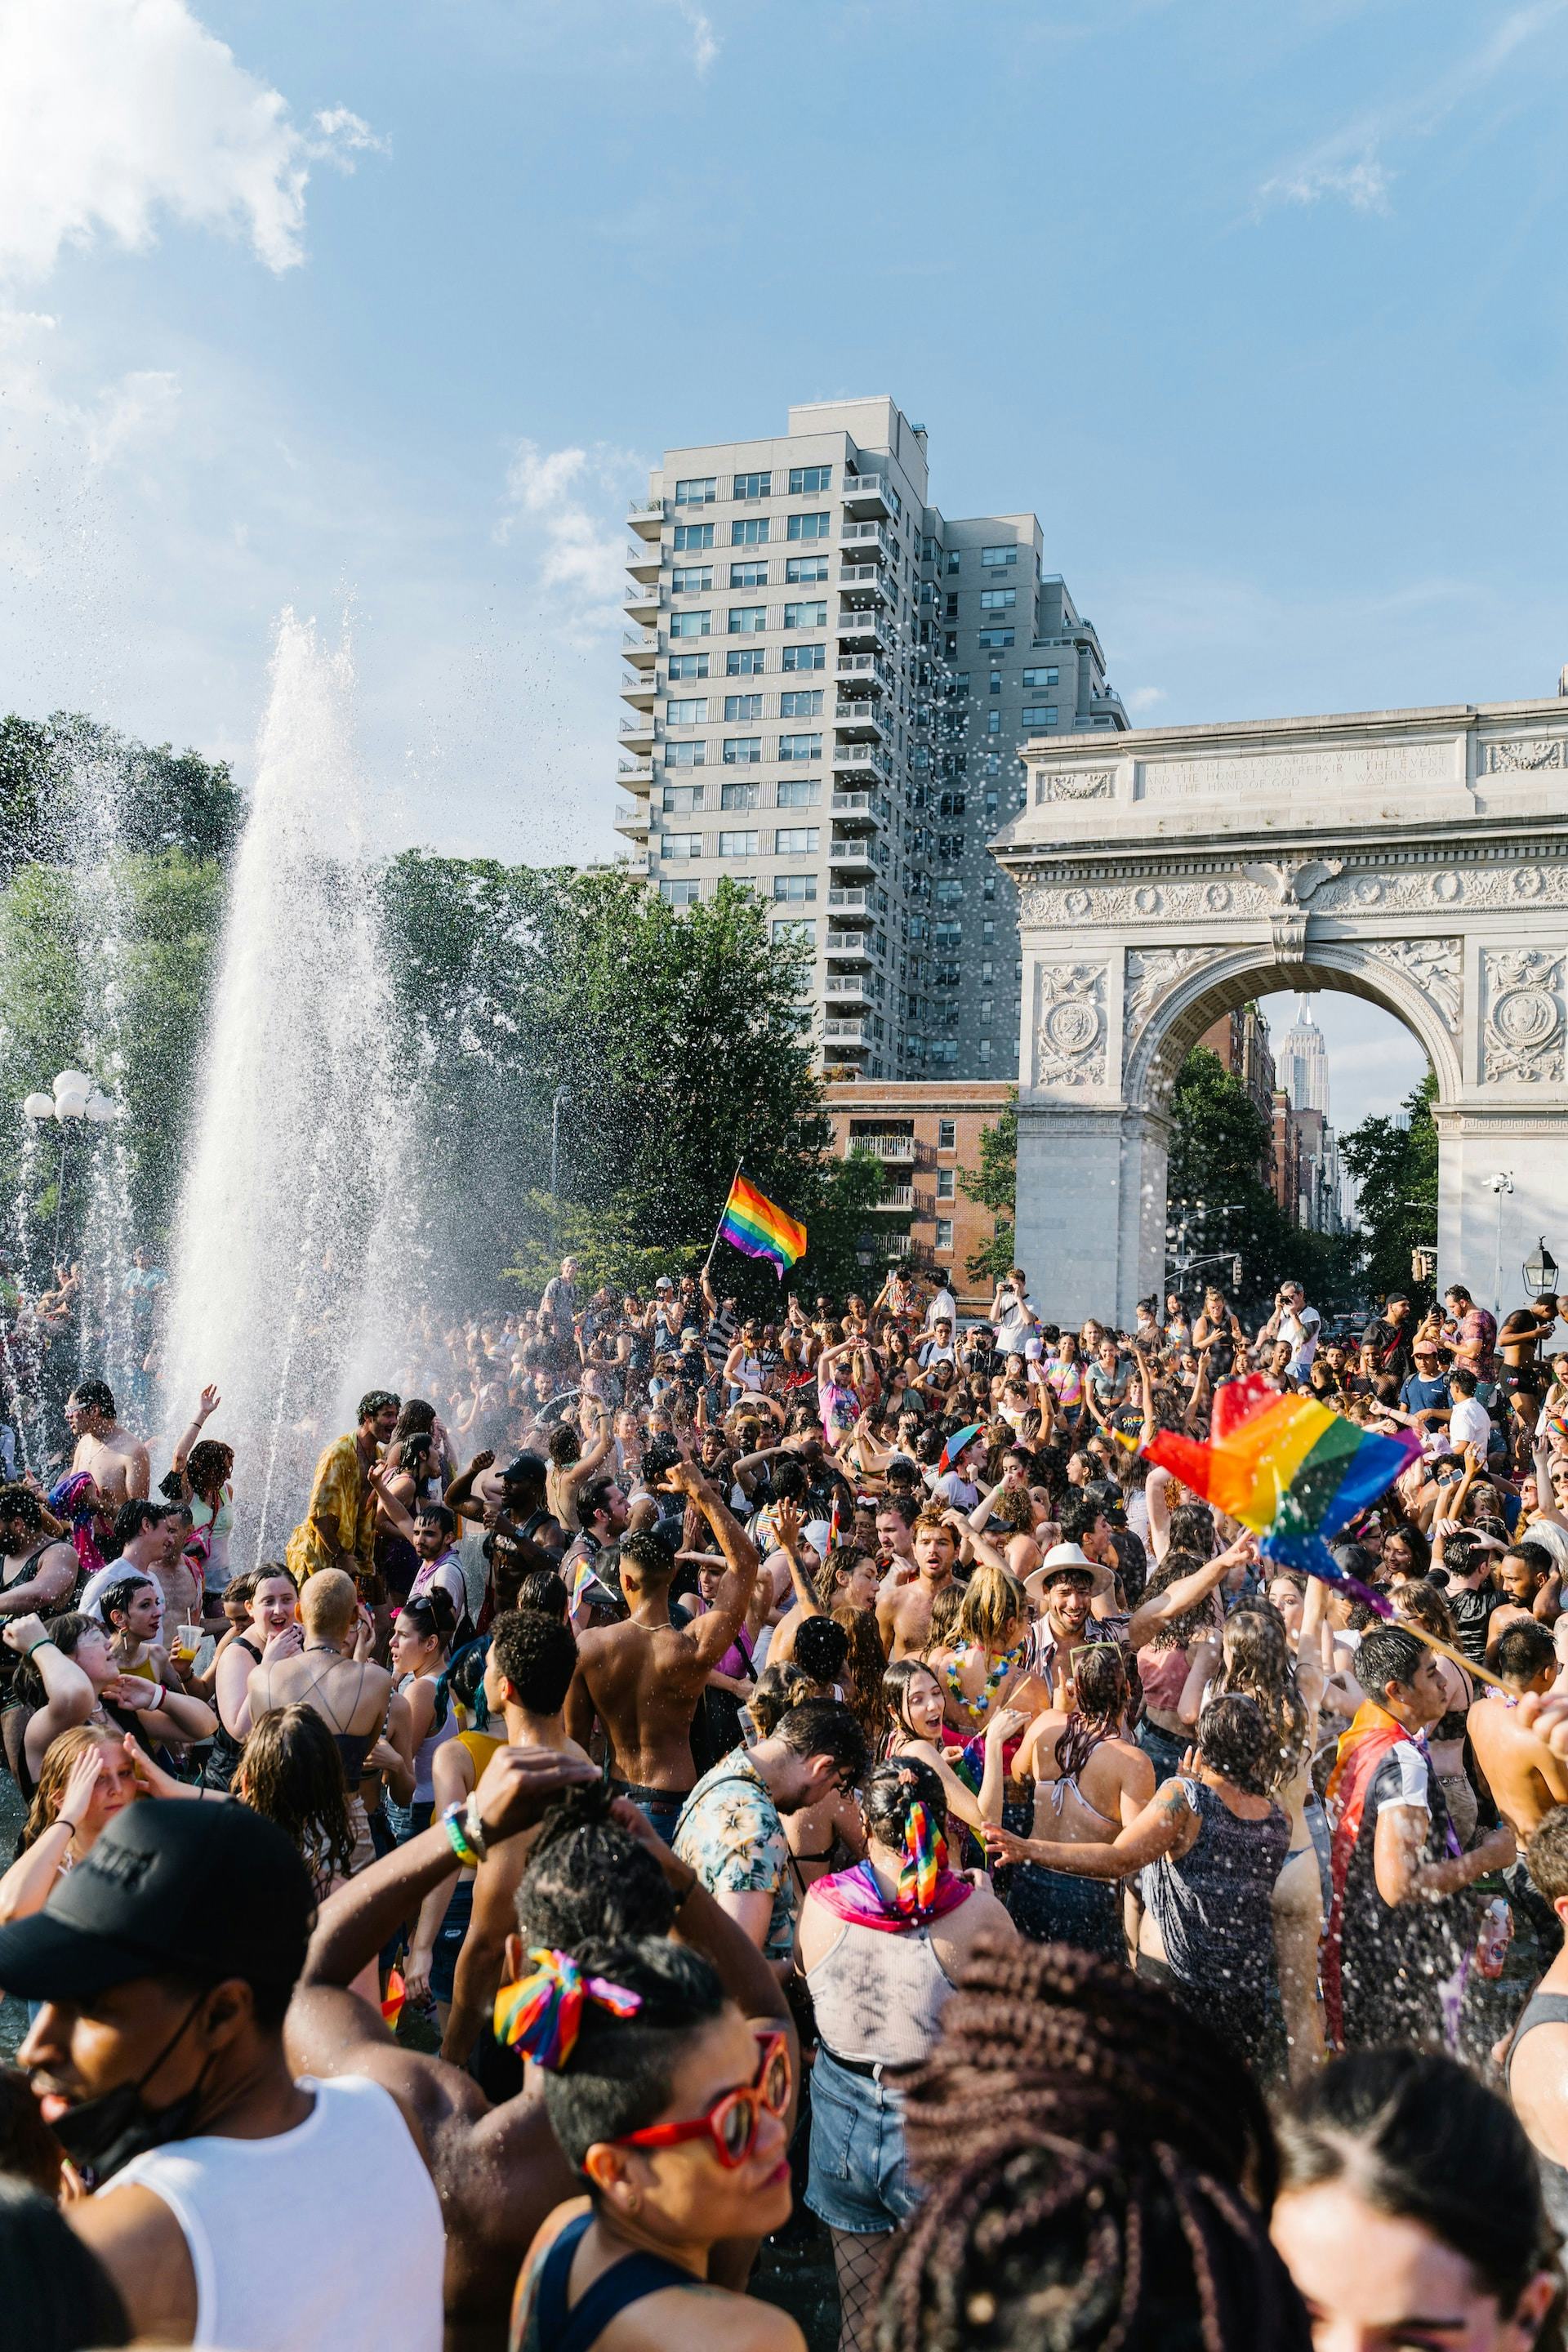 People celebrating in Washington Square Park in New York City waving gay Pride flags.